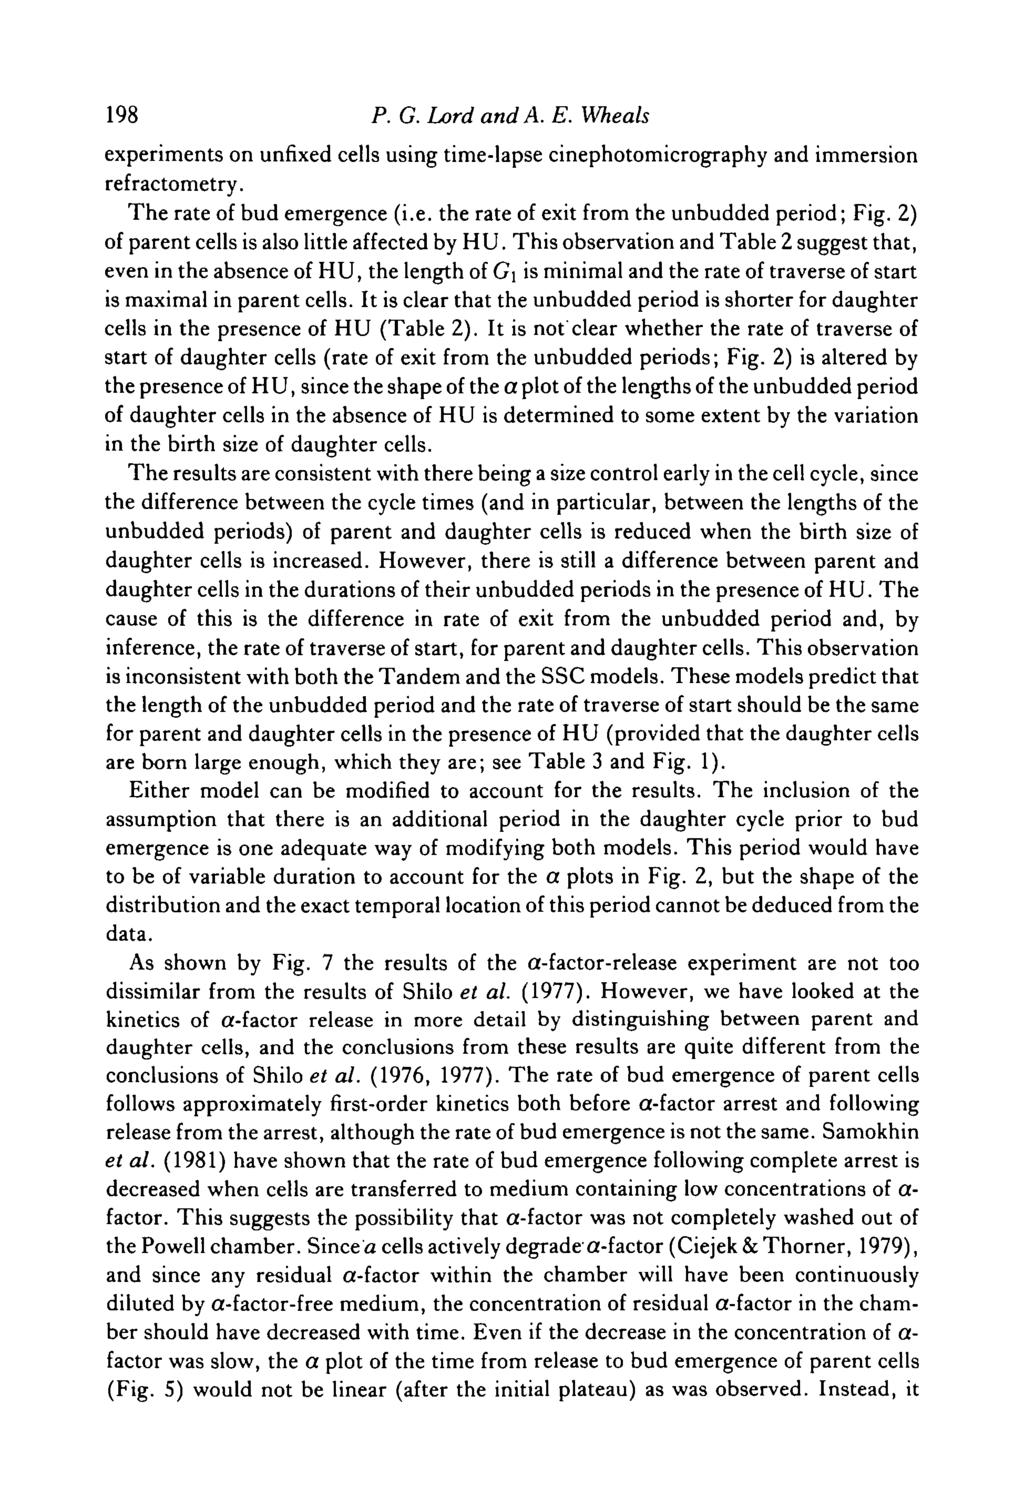 198 P. G. Lrd and A. E. Wheats experiments n unfixed cells using time-lapse cinephtmicrgraphy and immersin refractmetry. The rate f bud emergence (i.e. the rate f exit frm the unbudded perid; Fig.